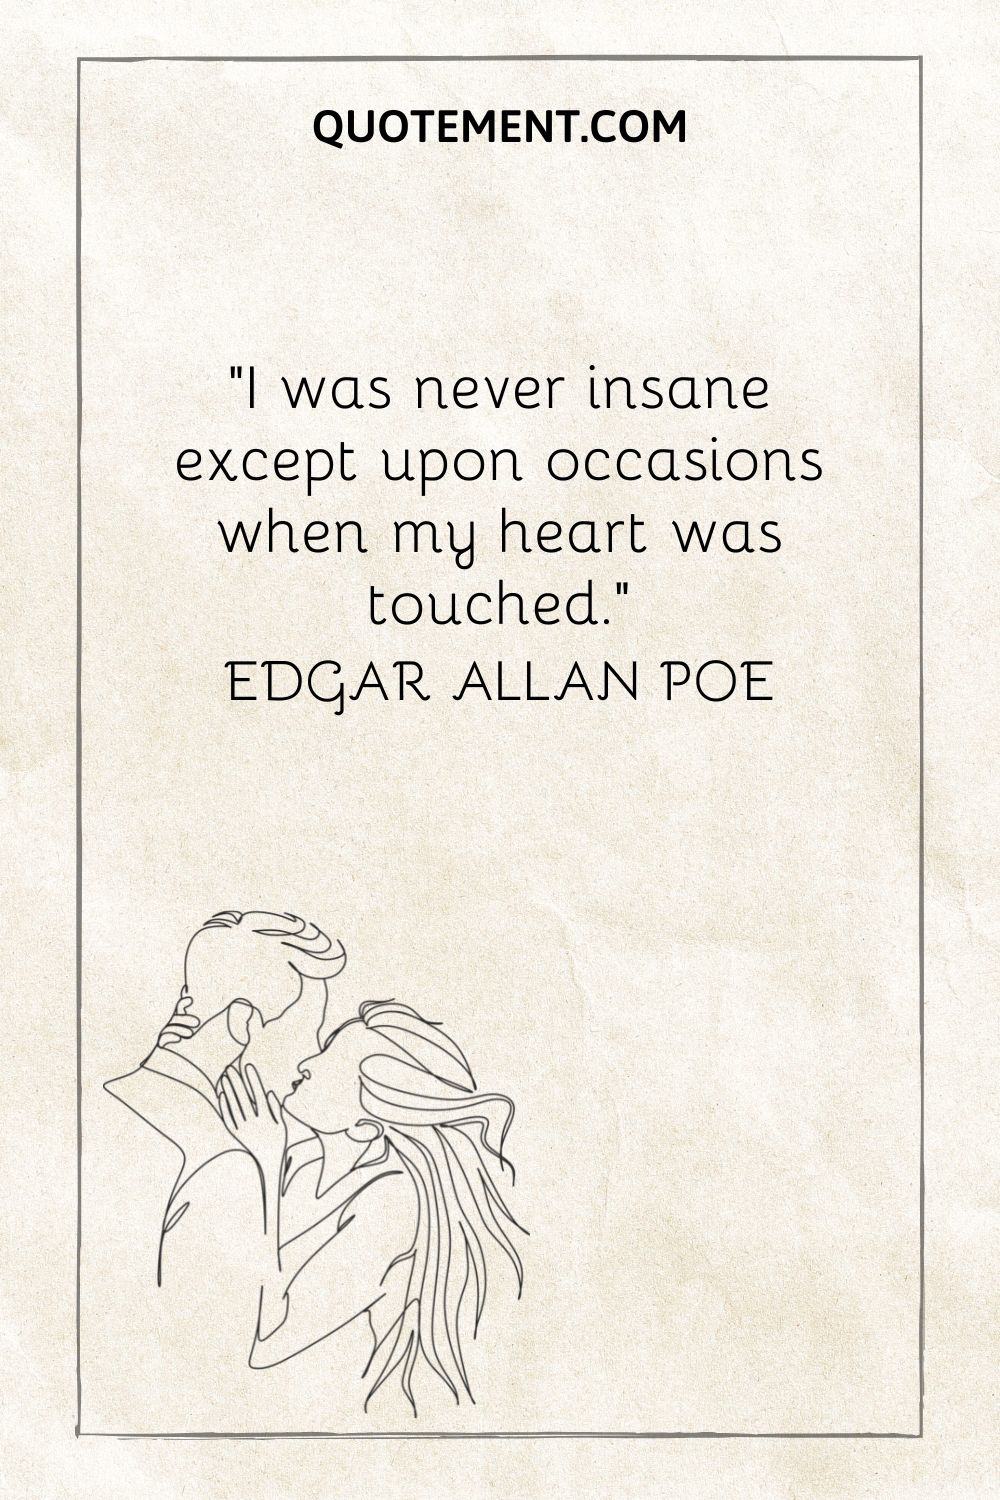 two people kissing representing edgar allan poe love quote